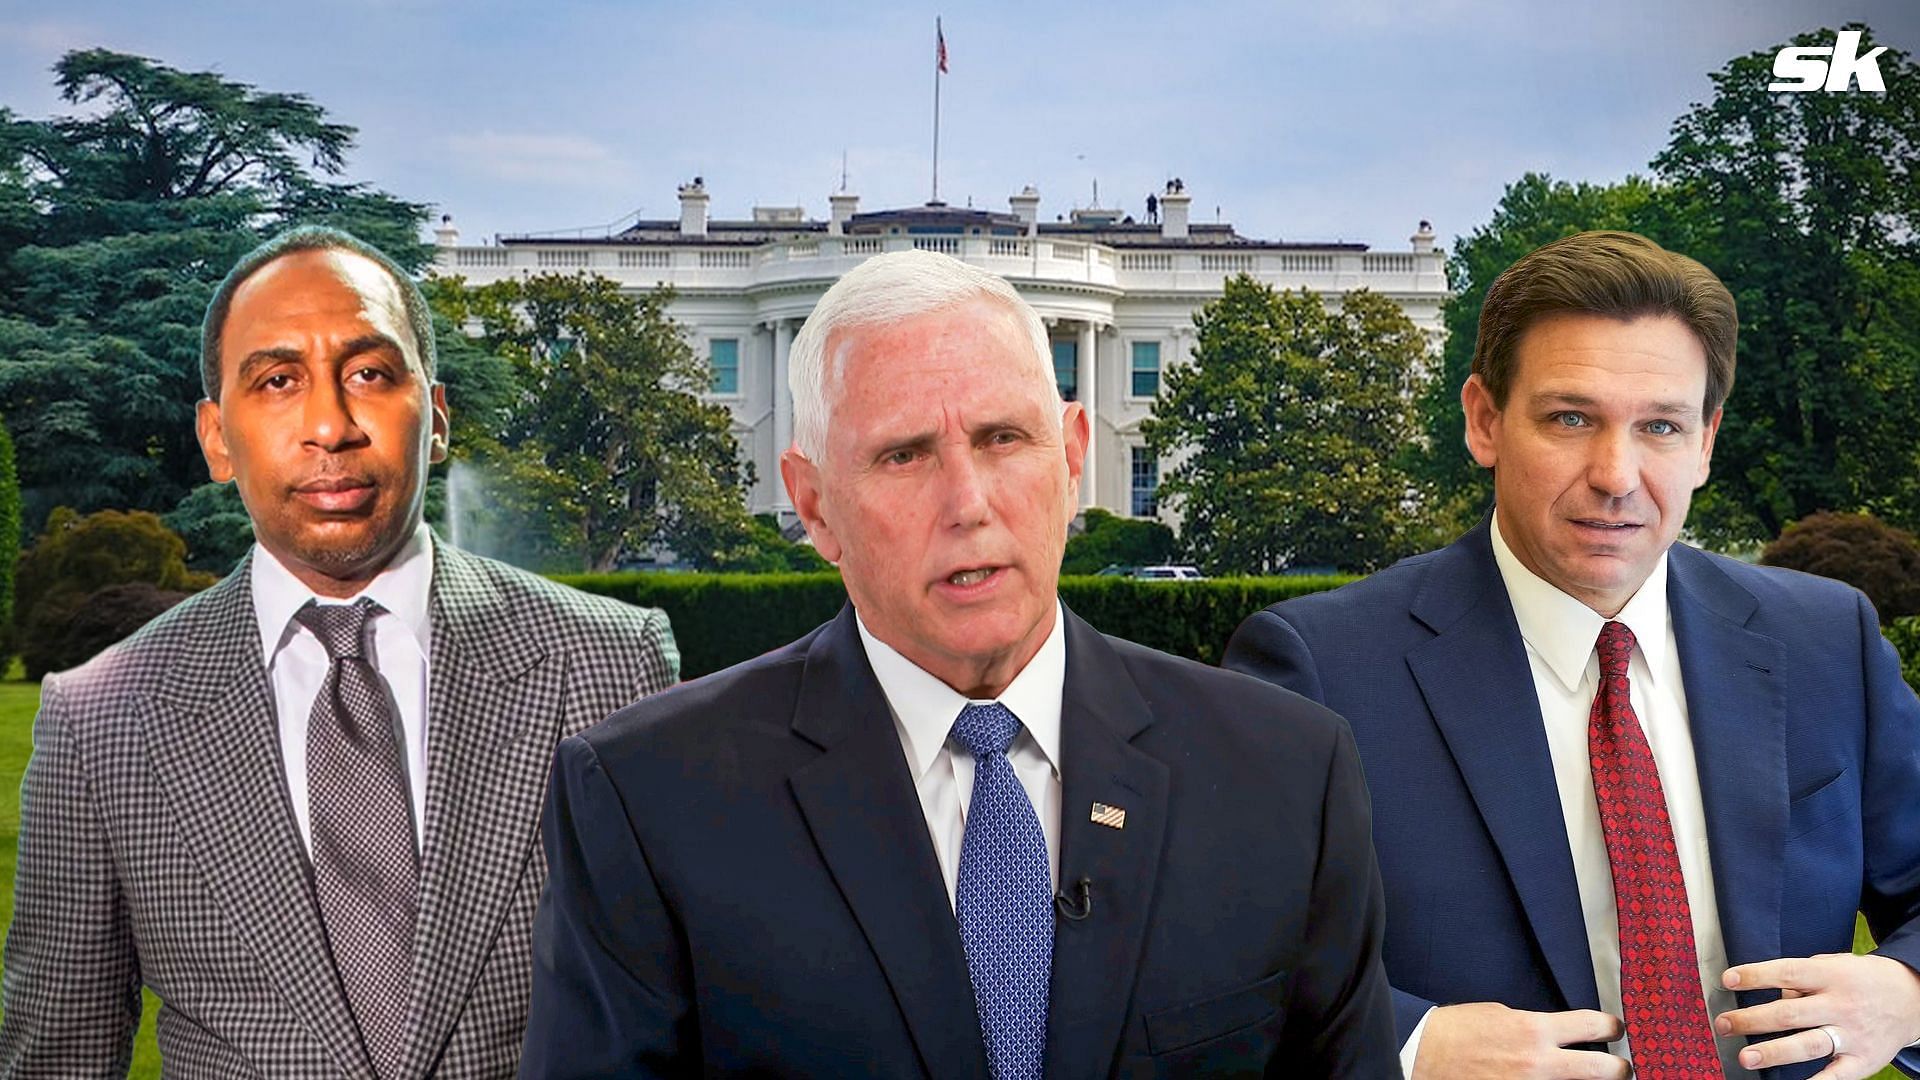 Stephen A. Smith called out Mike Pence and Ron De Santis for their alleged racist behavior.